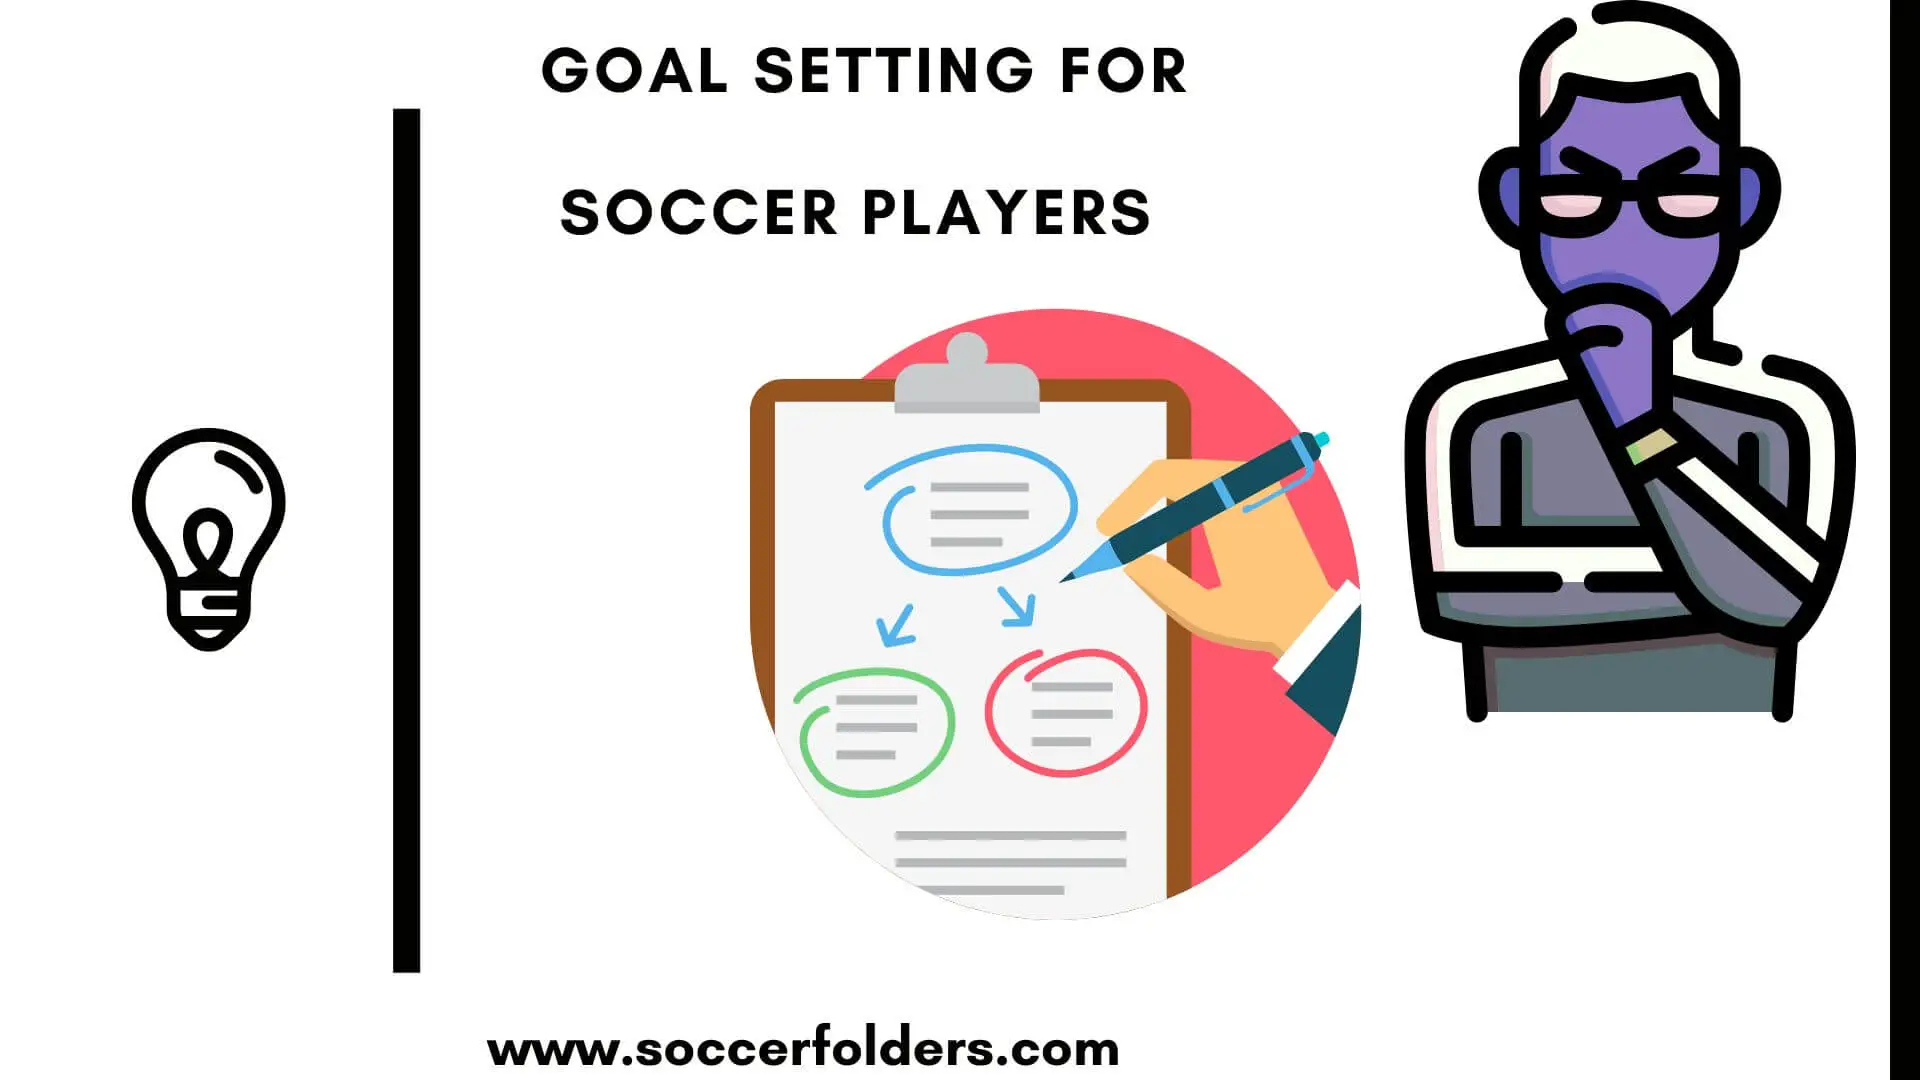 Goal setting for soccer players - Featured image